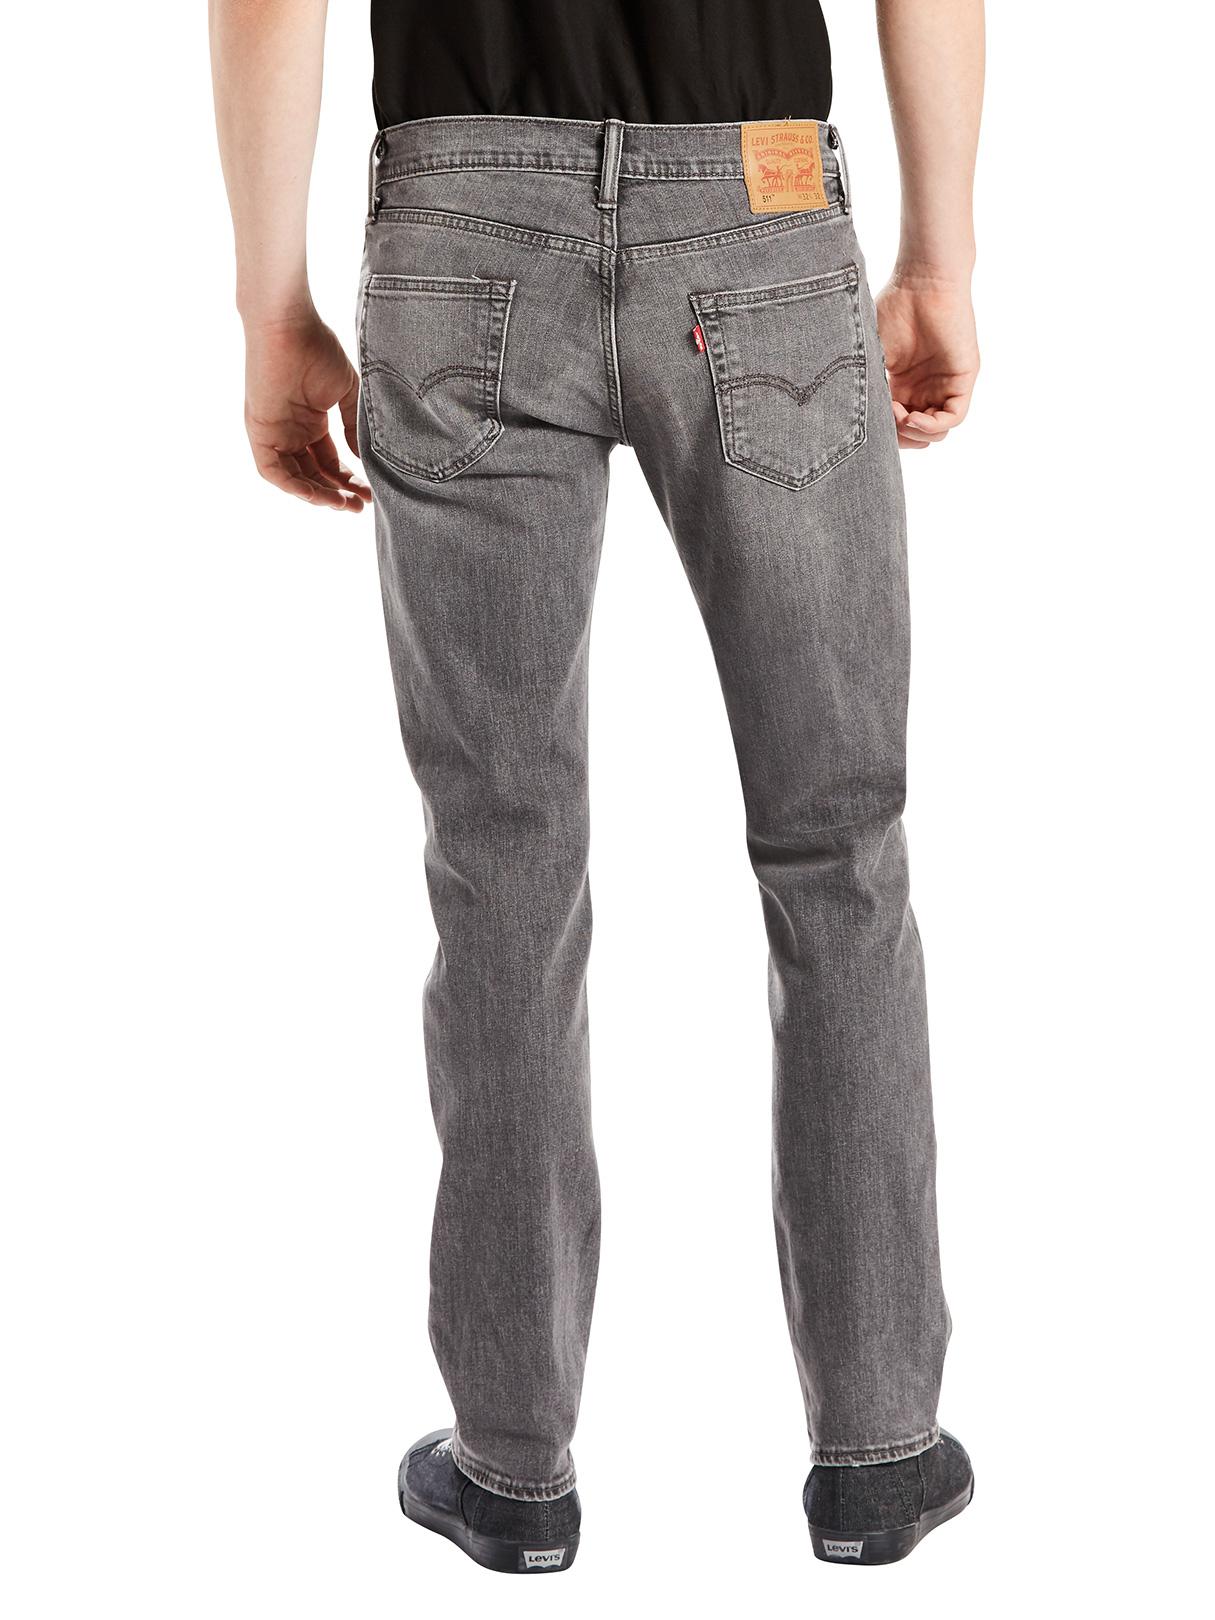 Levi's Denim Charcoal 511 Slim Fit Berry Hill Jeans in Grey for Men - Lyst